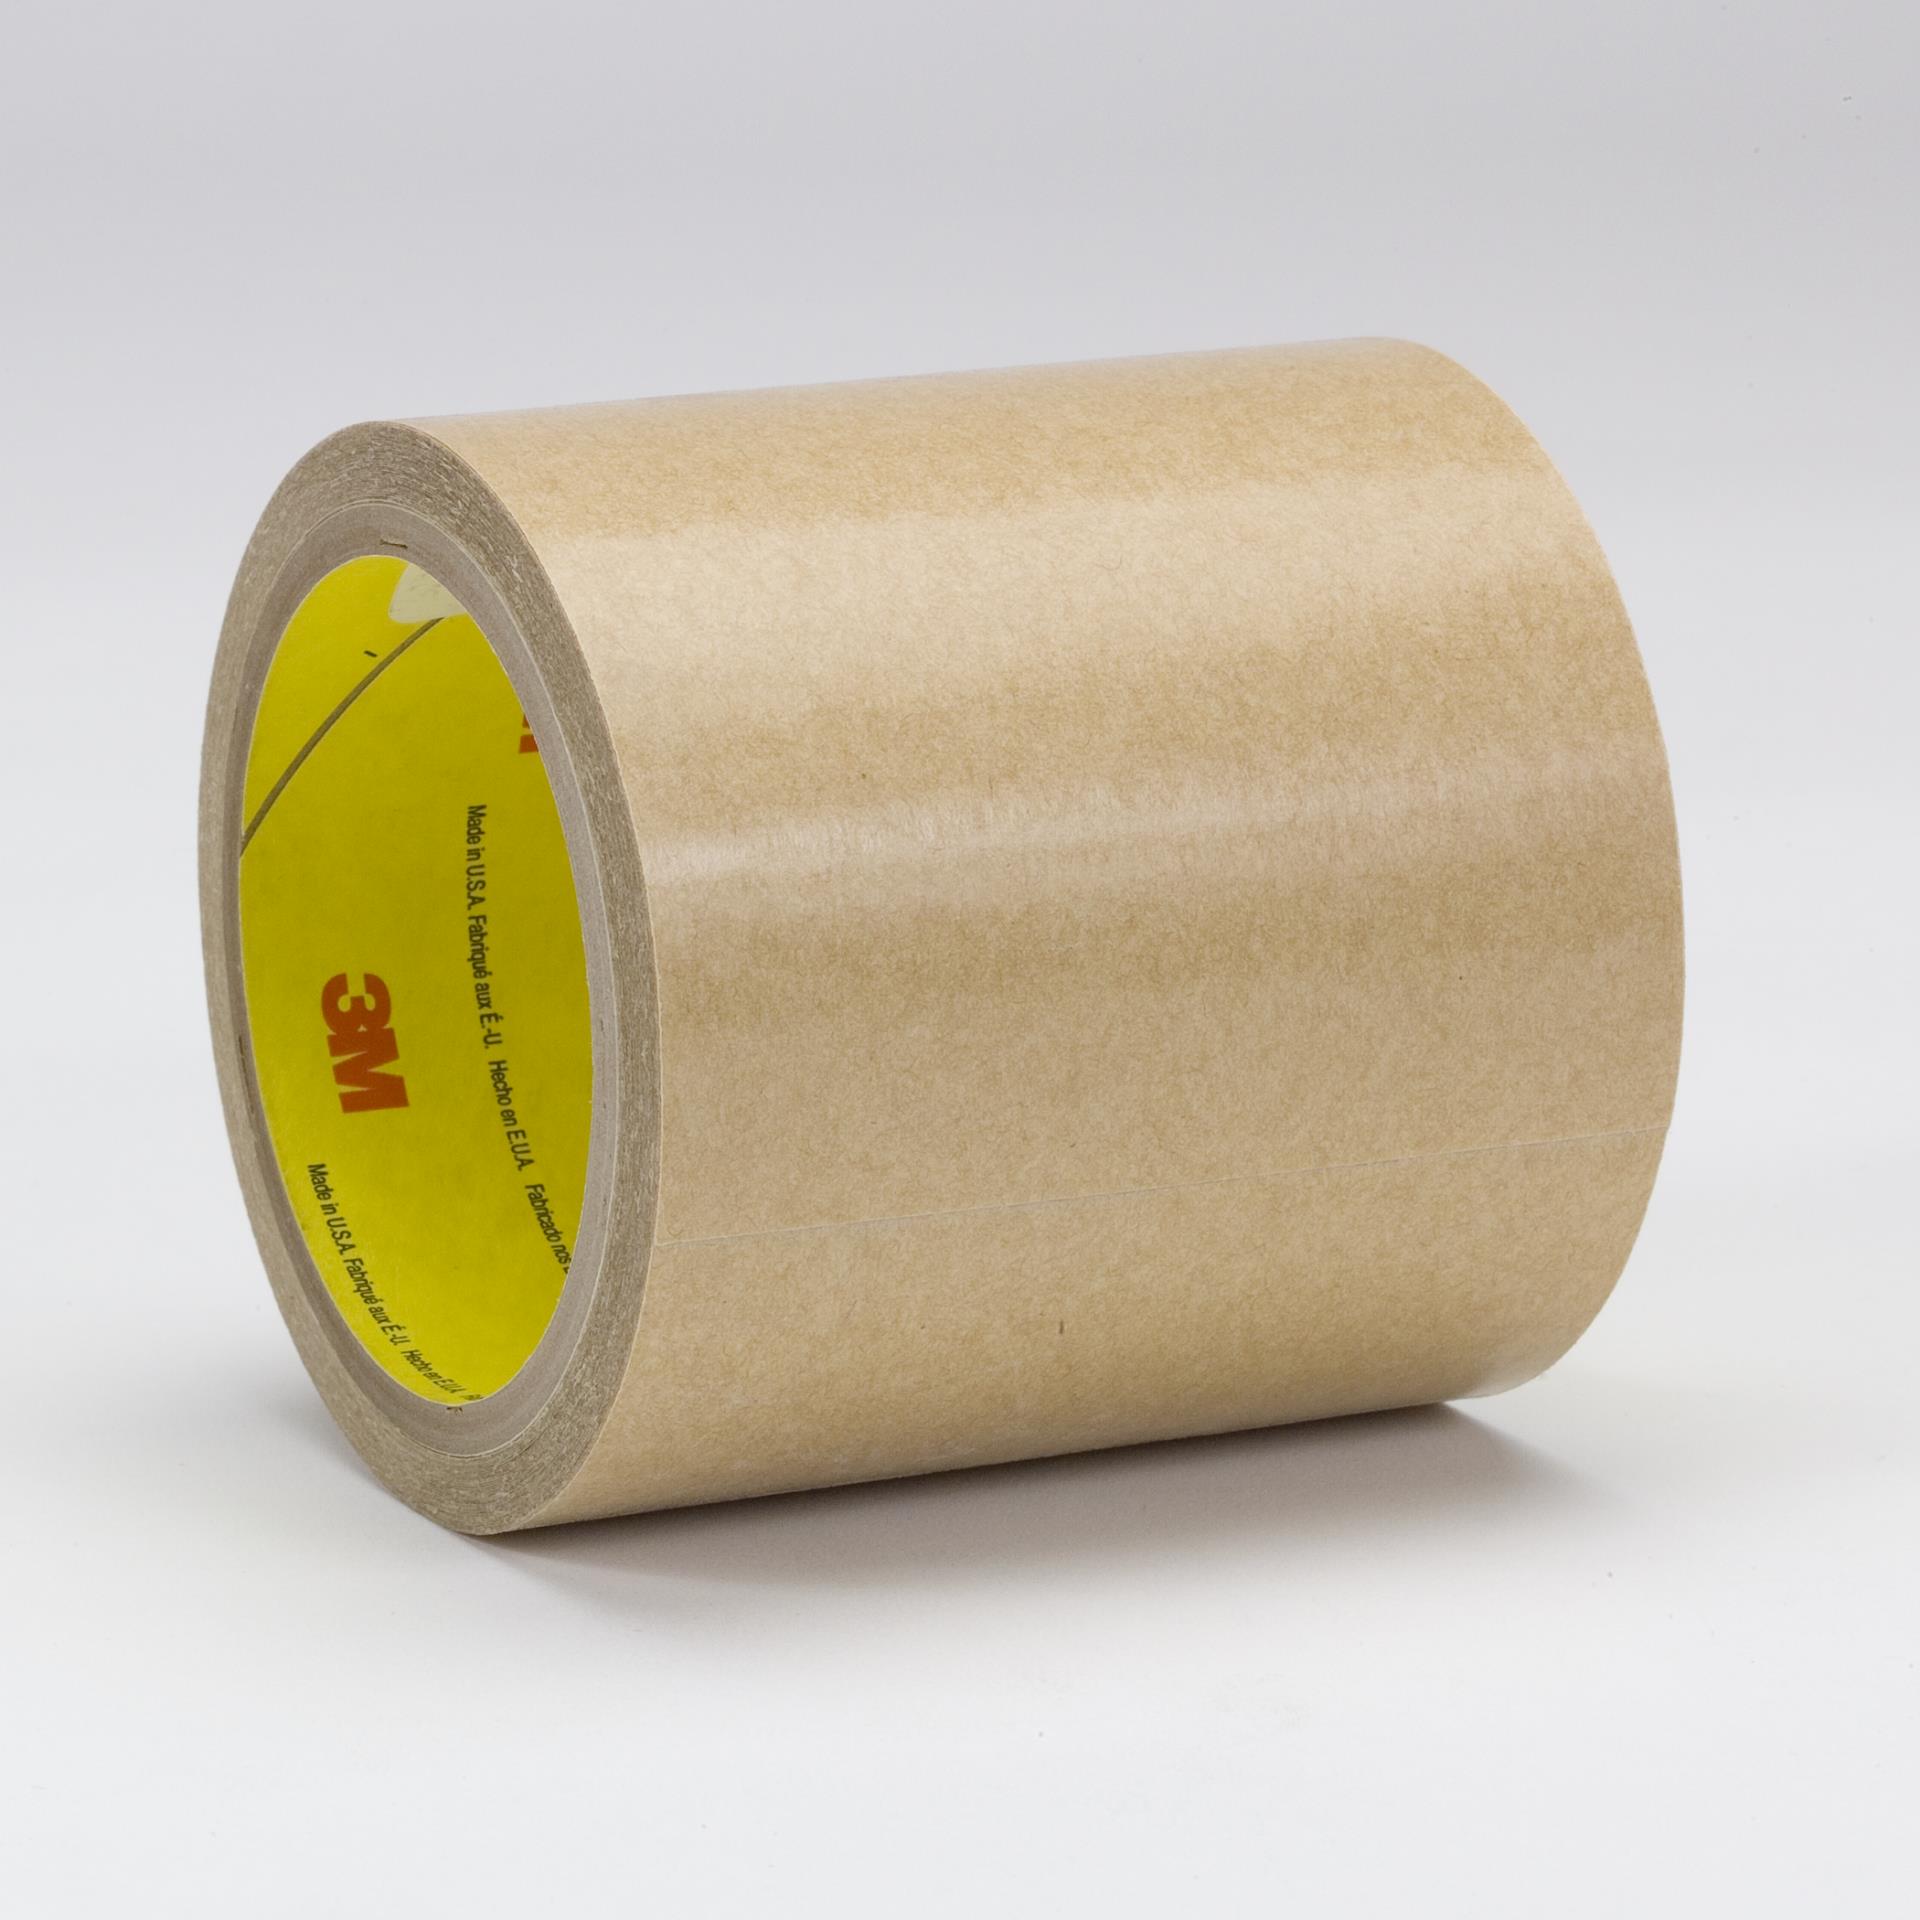 https://www.e-aircraftsupply.com/ItemImages/39/7010372839_3M_Adhesive_Transfer_Tape_950EK_Clear.jpg